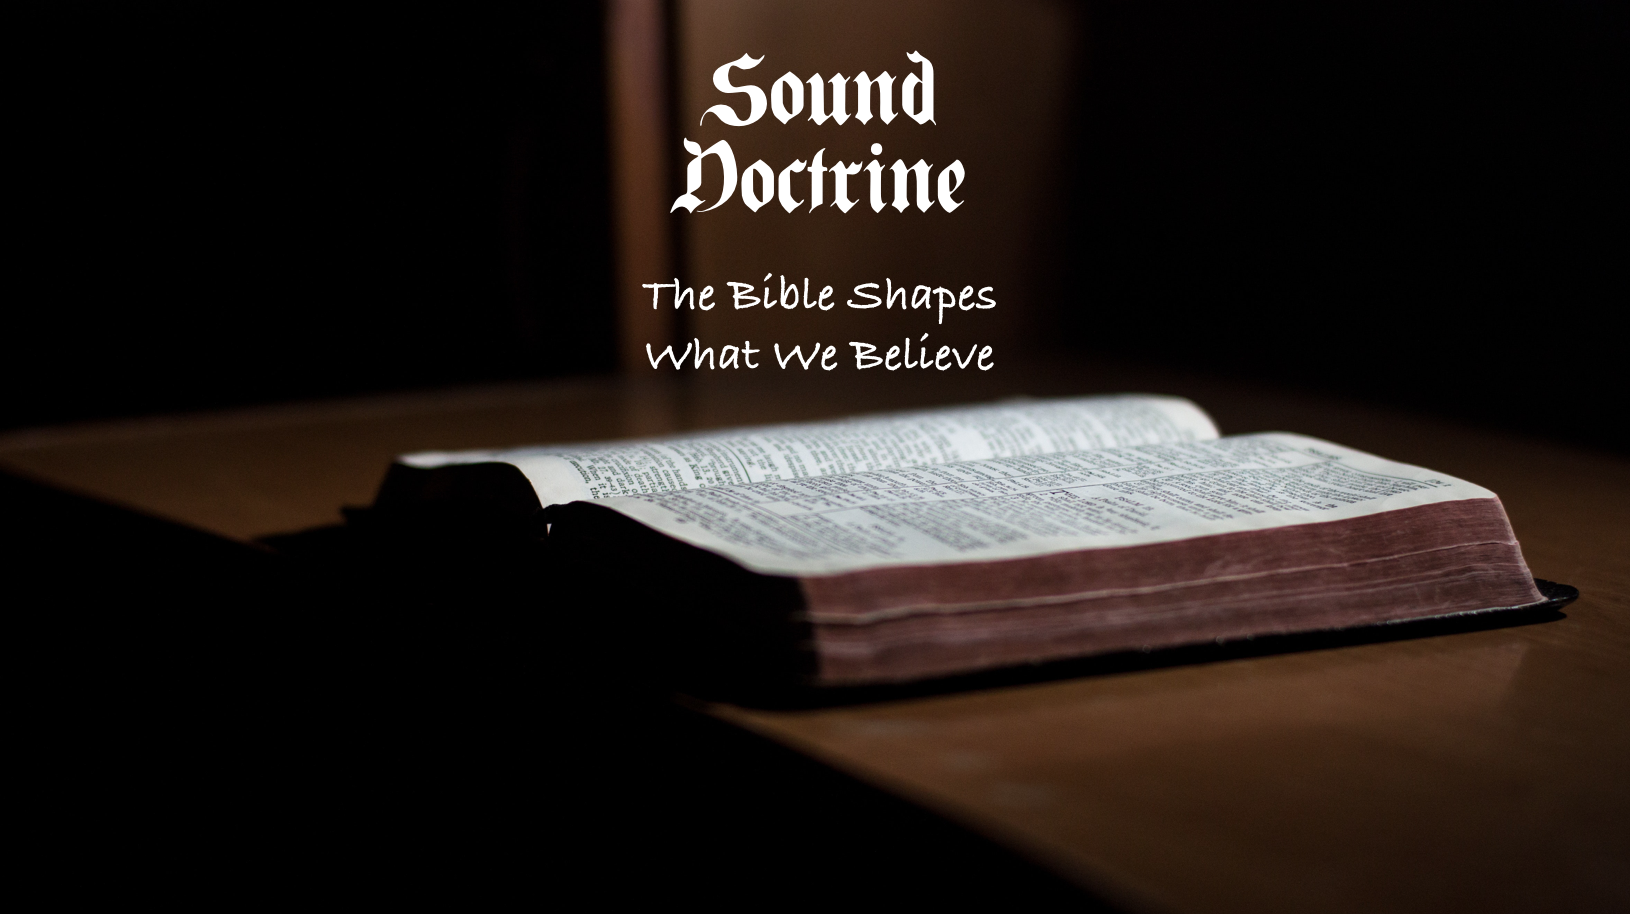 Doctrine: End Times